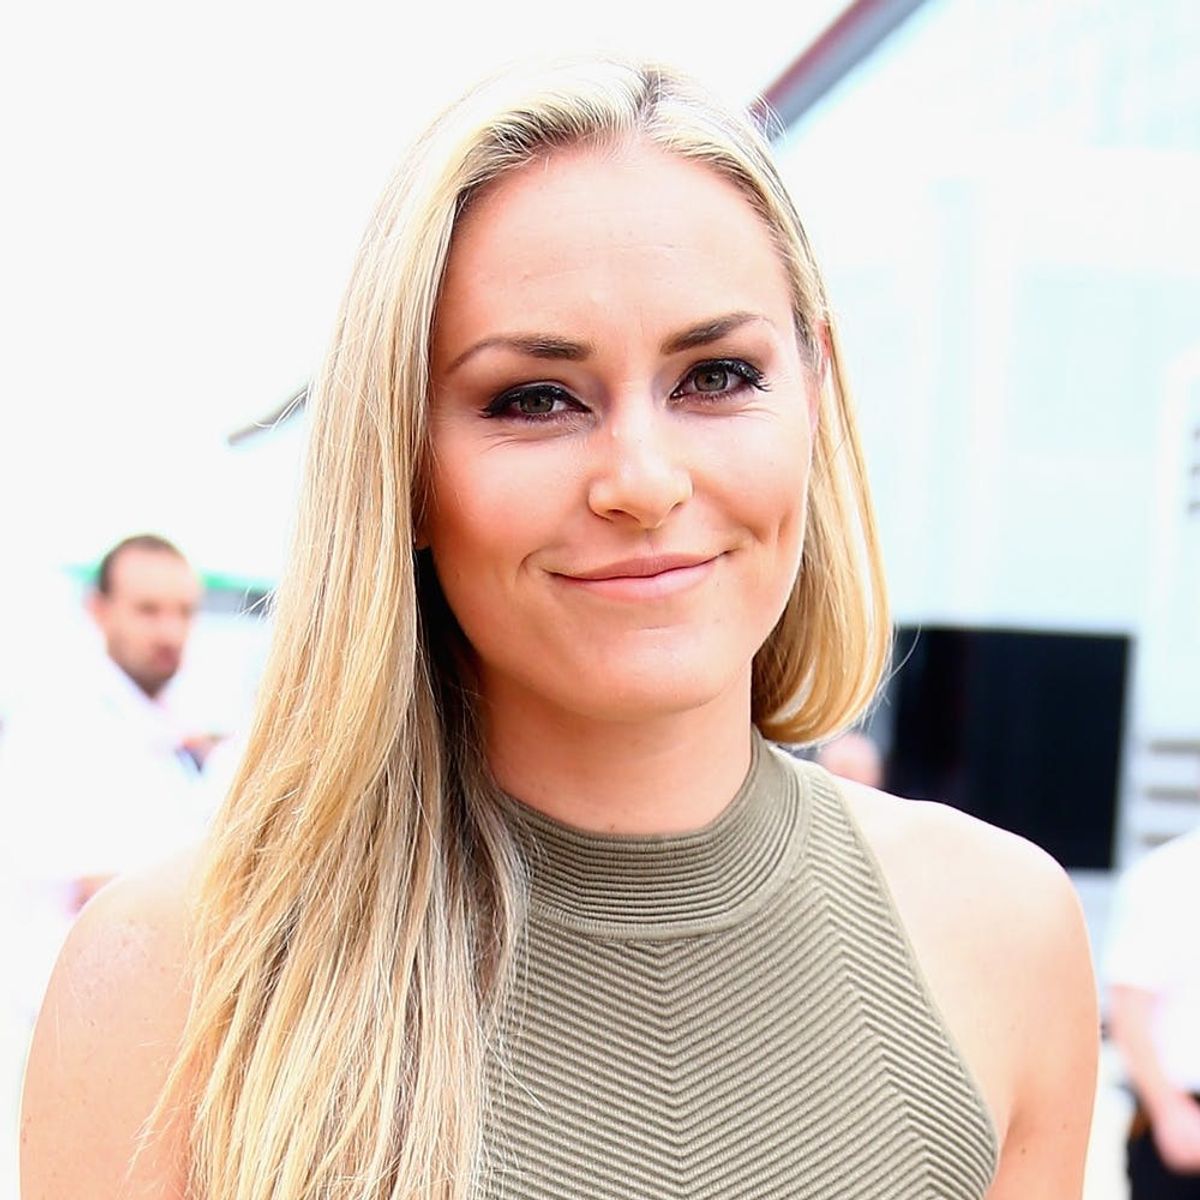 Sprained Knee? Try Putting *This* Food on It, Like Olympic Skier Lindsey Vonn